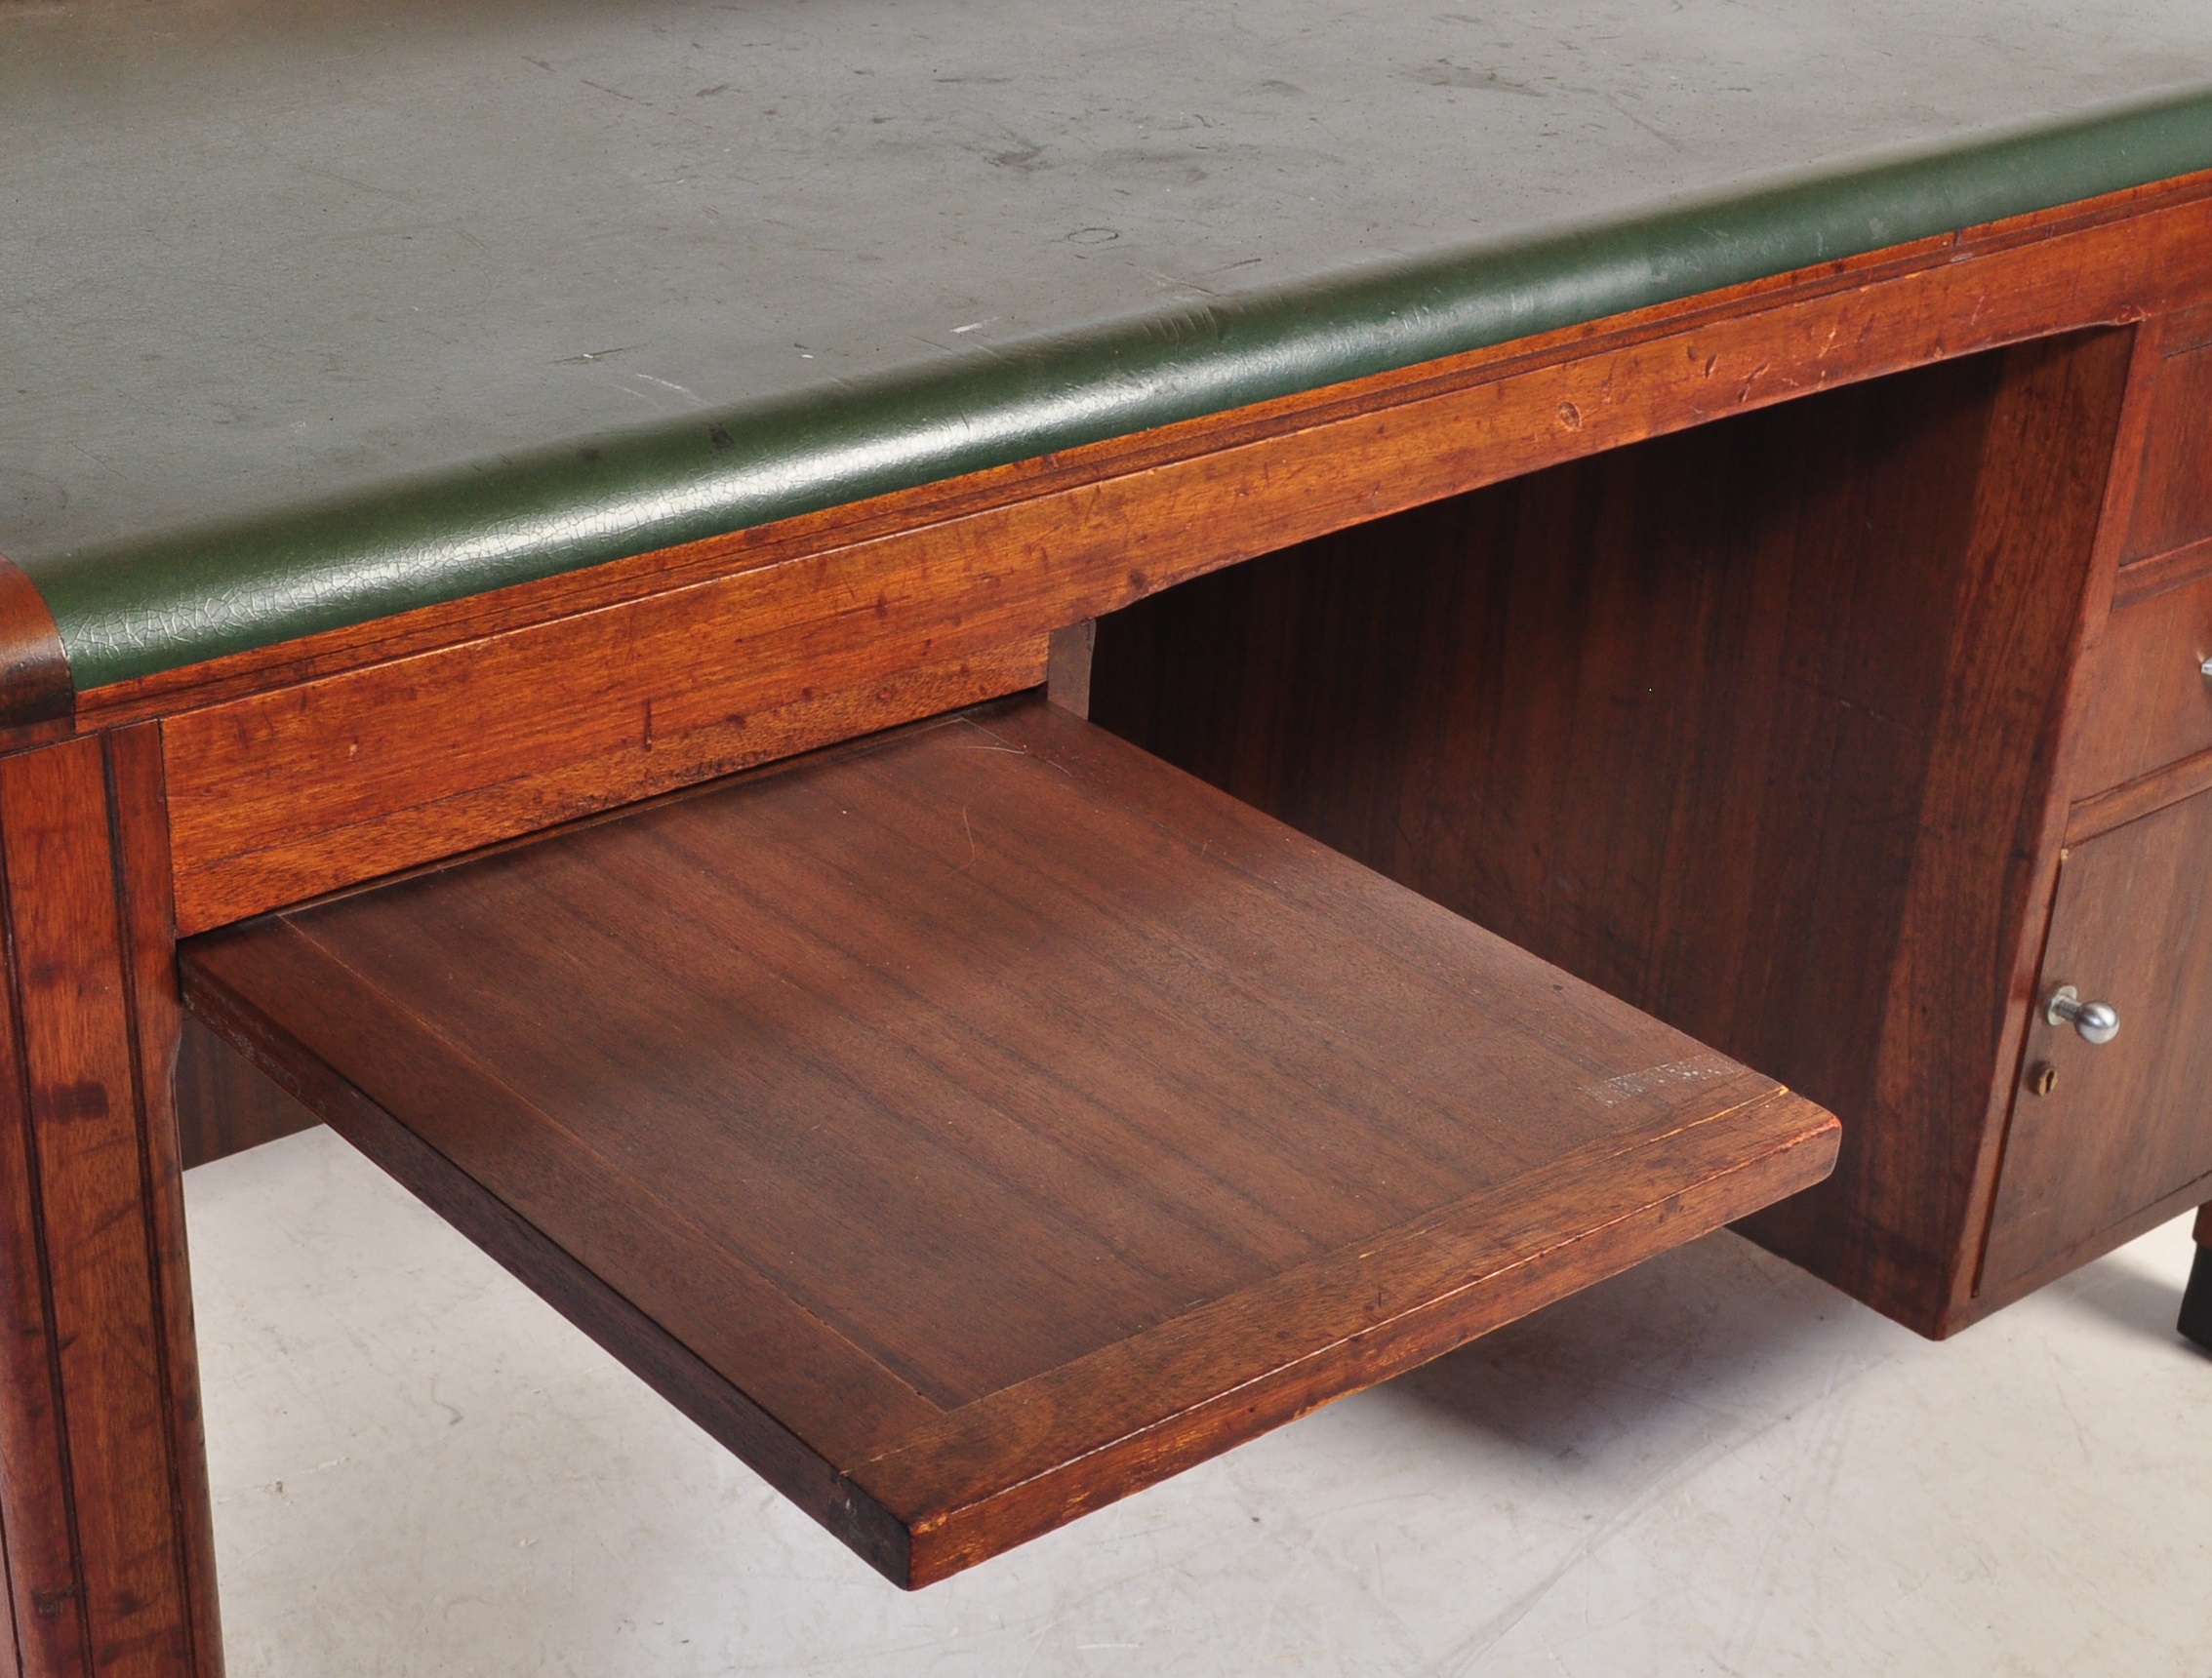 VINTAGE 20TH CENTURY OAK DESK WITH GREEN LEATHER WRITING SKIVER - Image 5 of 9